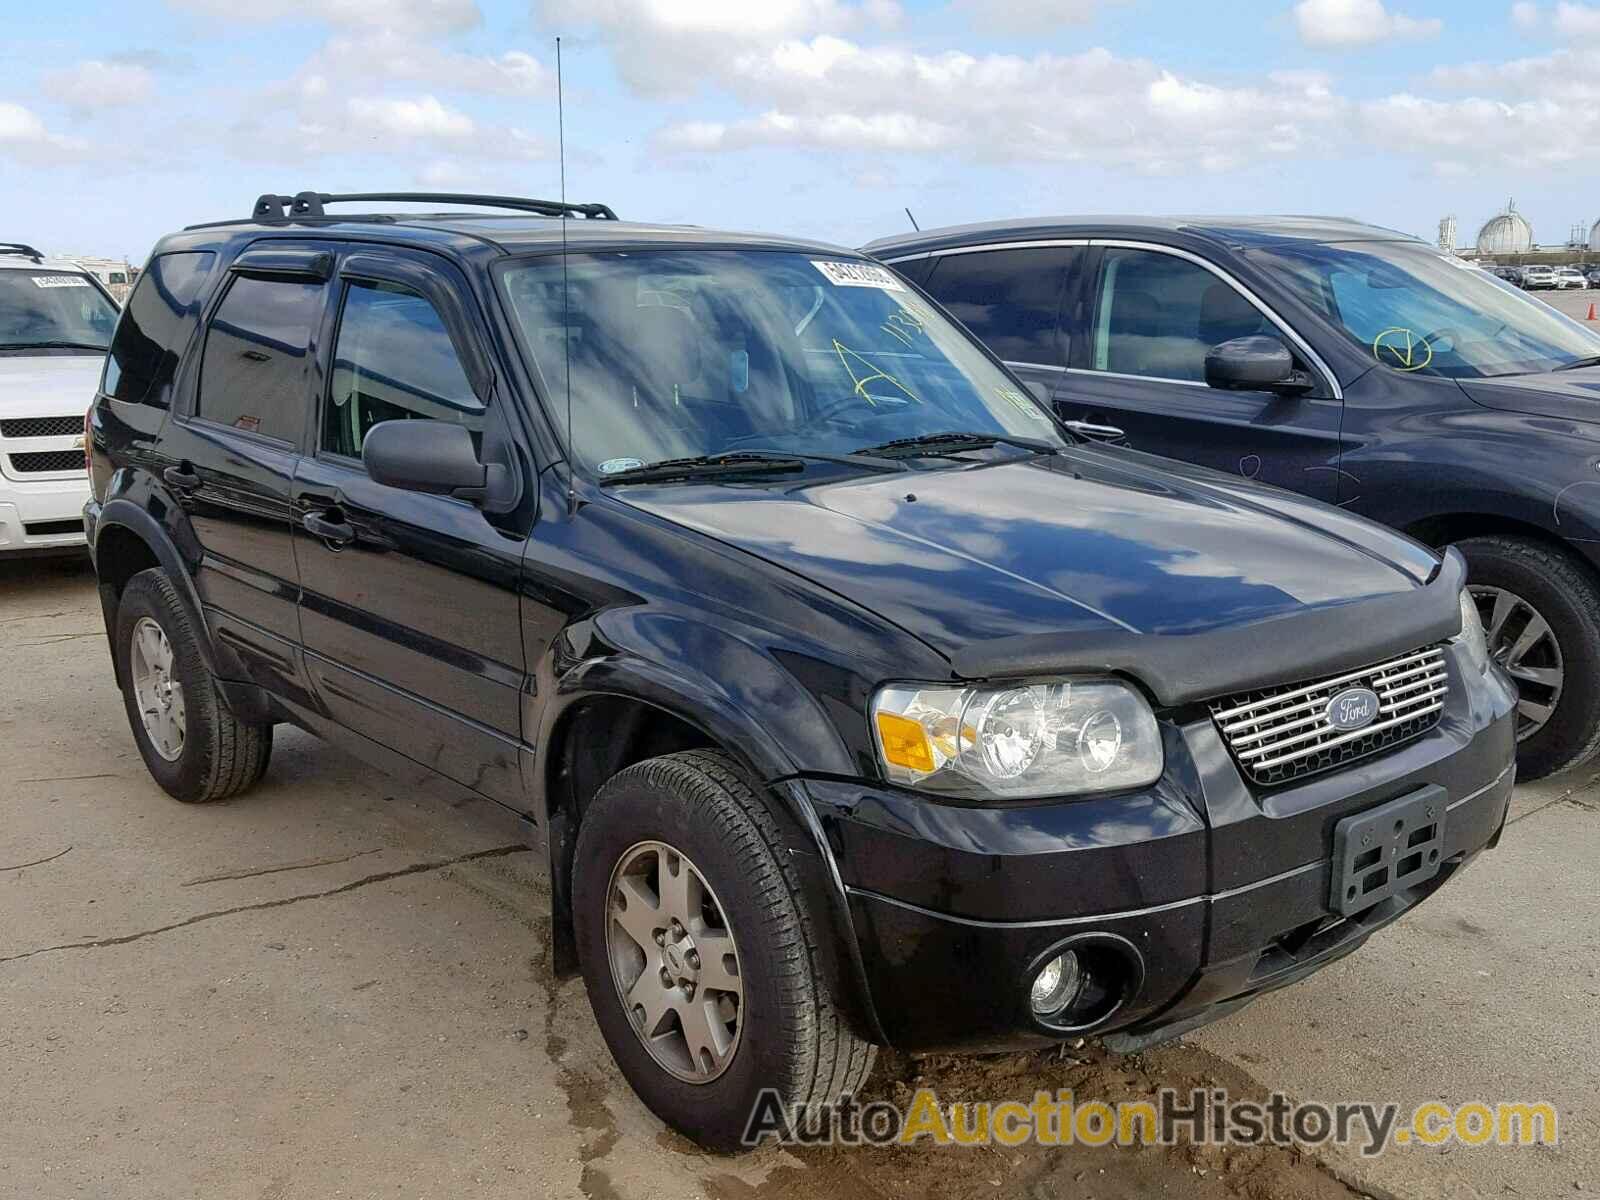 2005 FORD ESCAPE LIMITED, 1FMCU04195KB69493